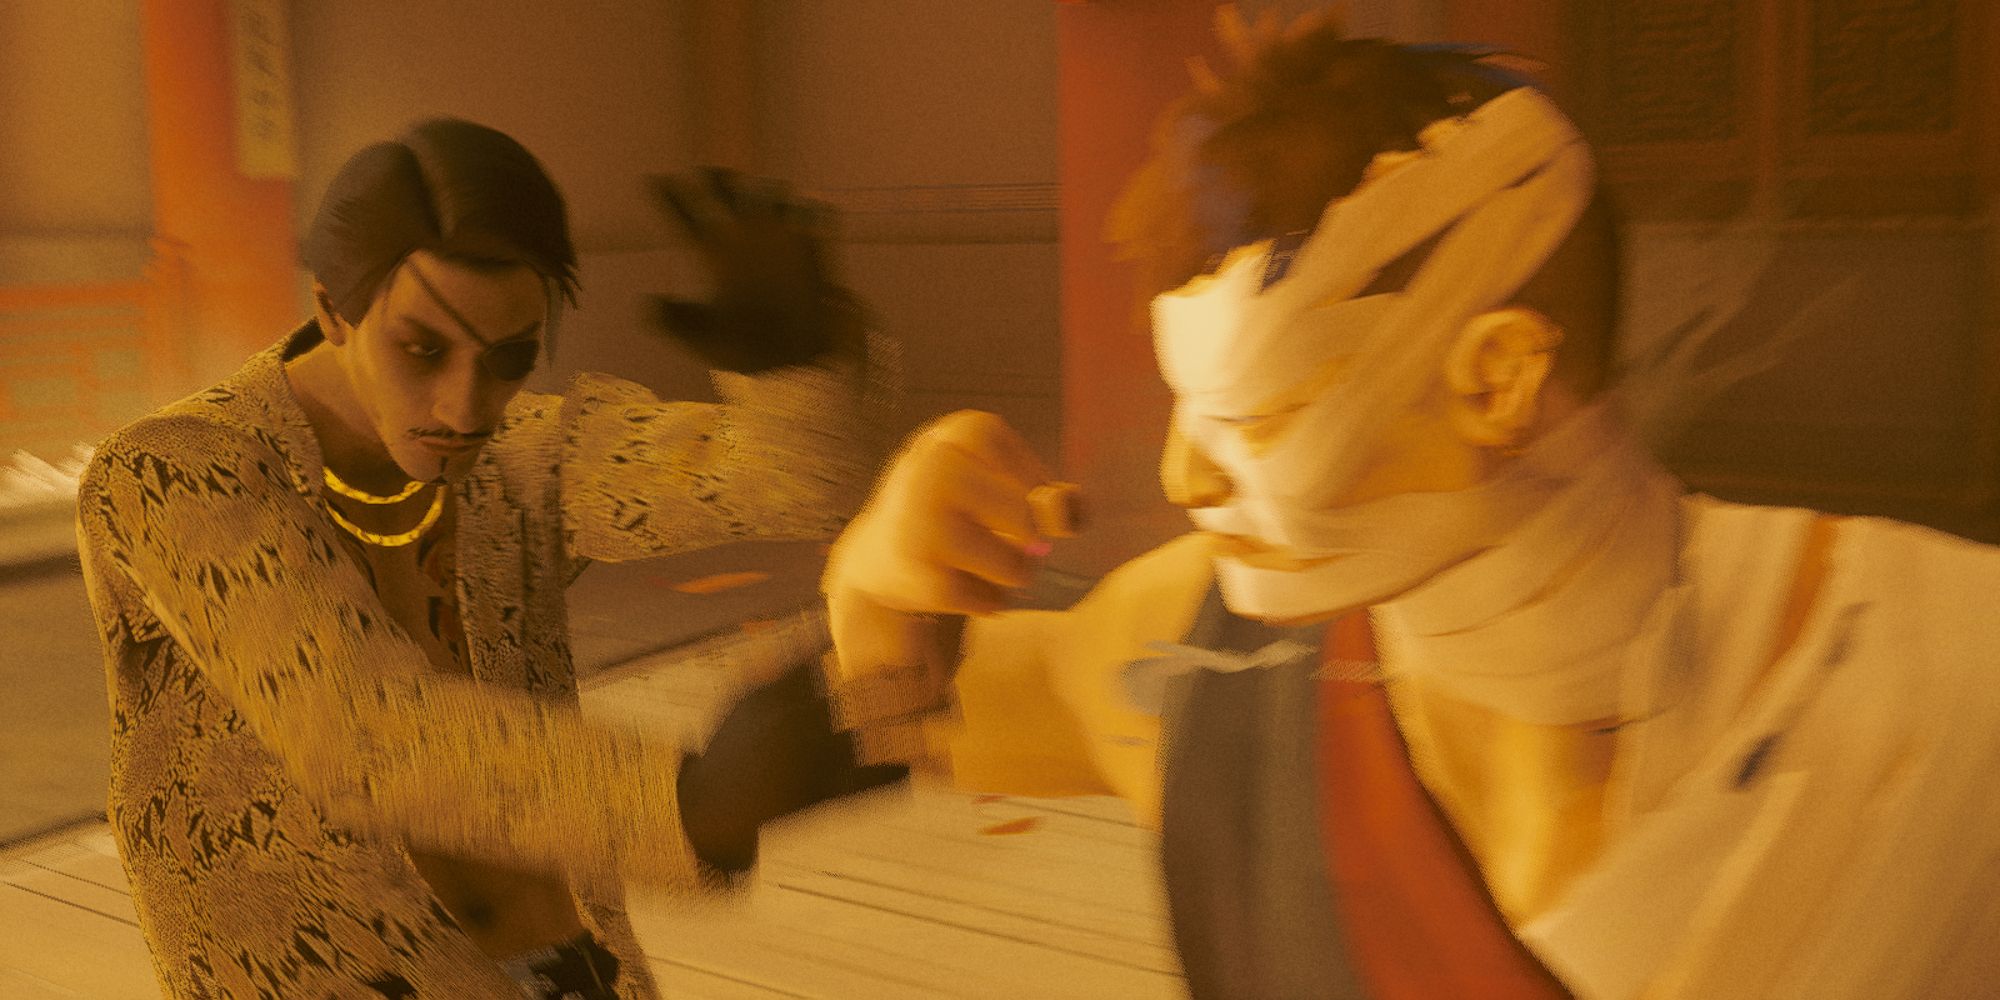 Goro Majima fighting a man with bandages on his face.